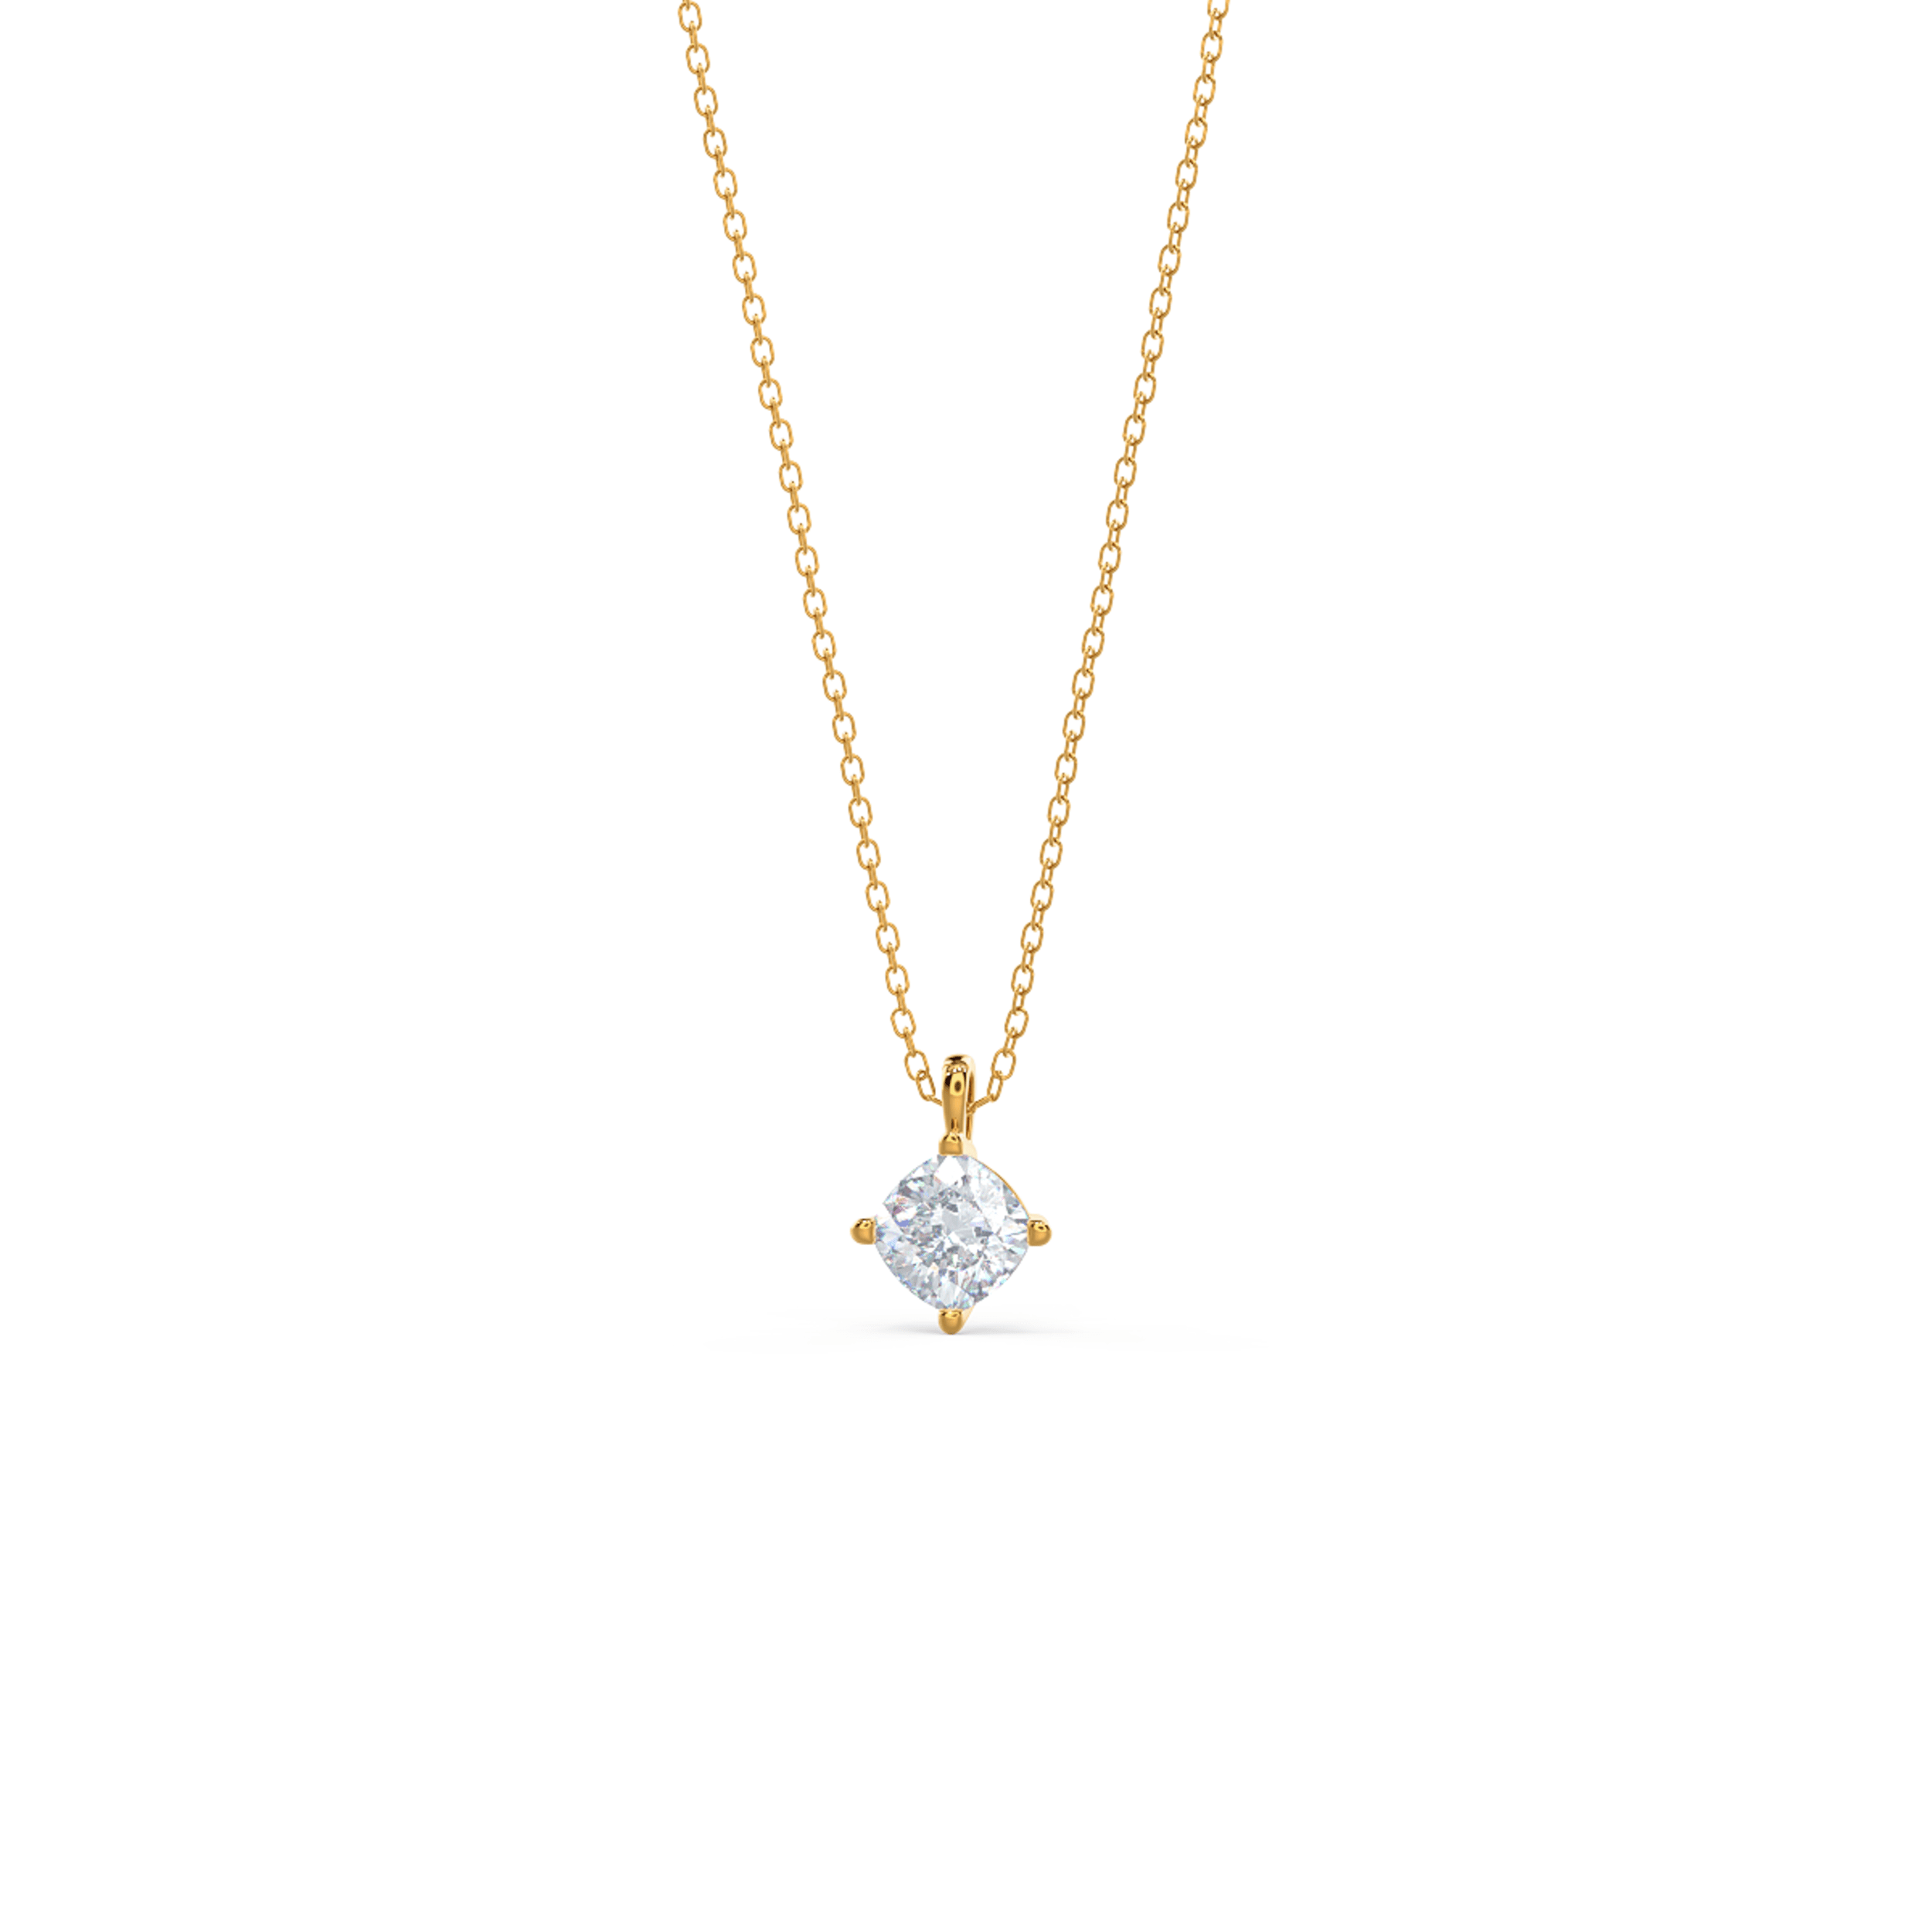 14k Yellow Gold Classic Cushion Pendant featuring Hand Selected 1.0 ct Lab Diamonds